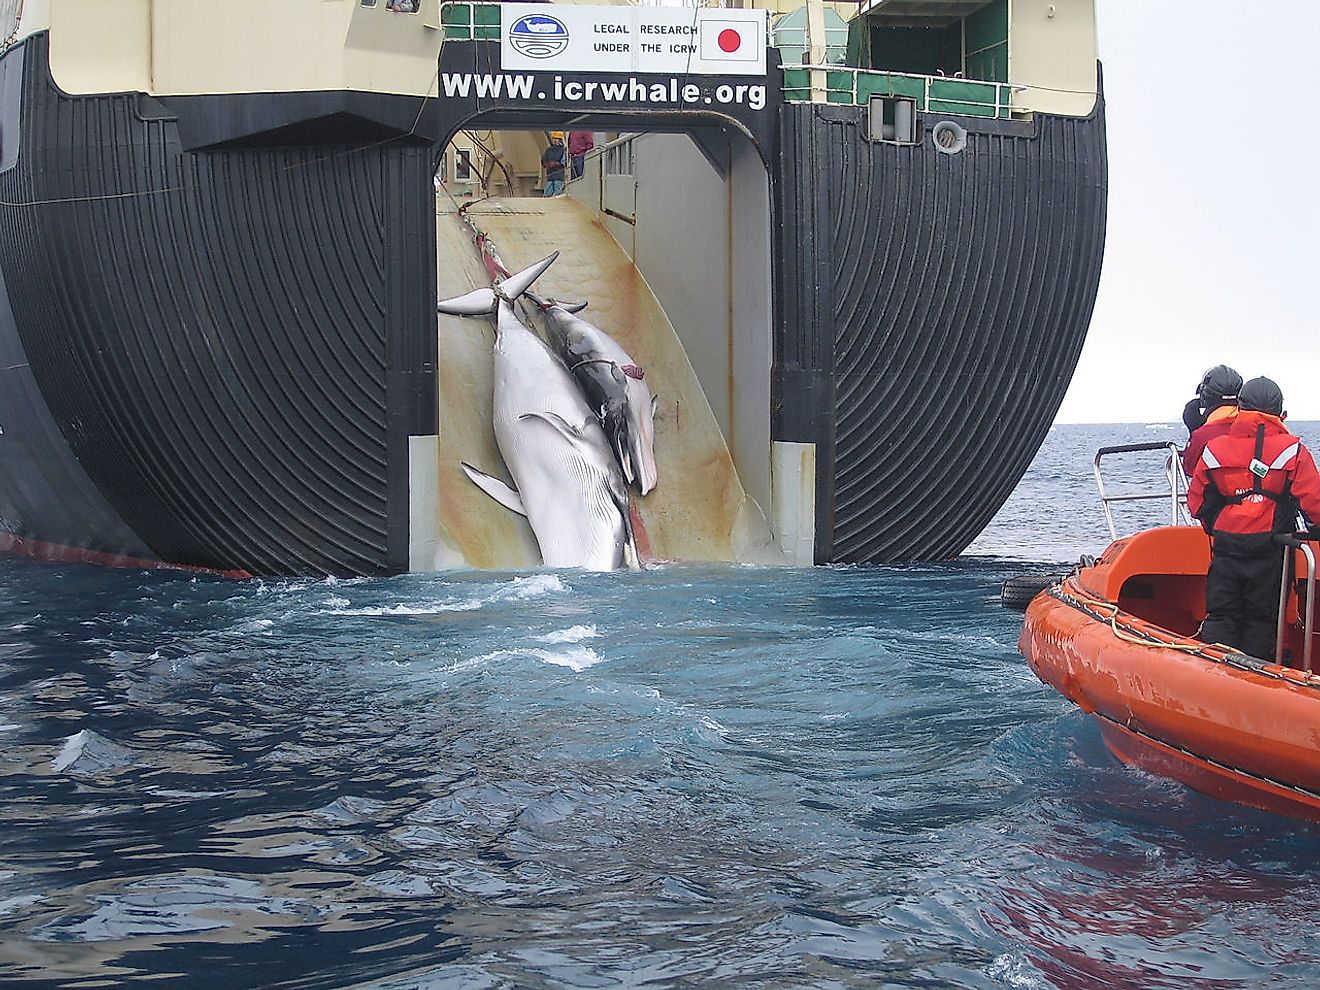 An adult and sub-adult Minke whale are dragged aboard the Nisshin Maru, a Japanese whaling vessel that is the world's only factory whaling ship. Image credit: Australian Customs and Border Protection Service/Wikimedia.org